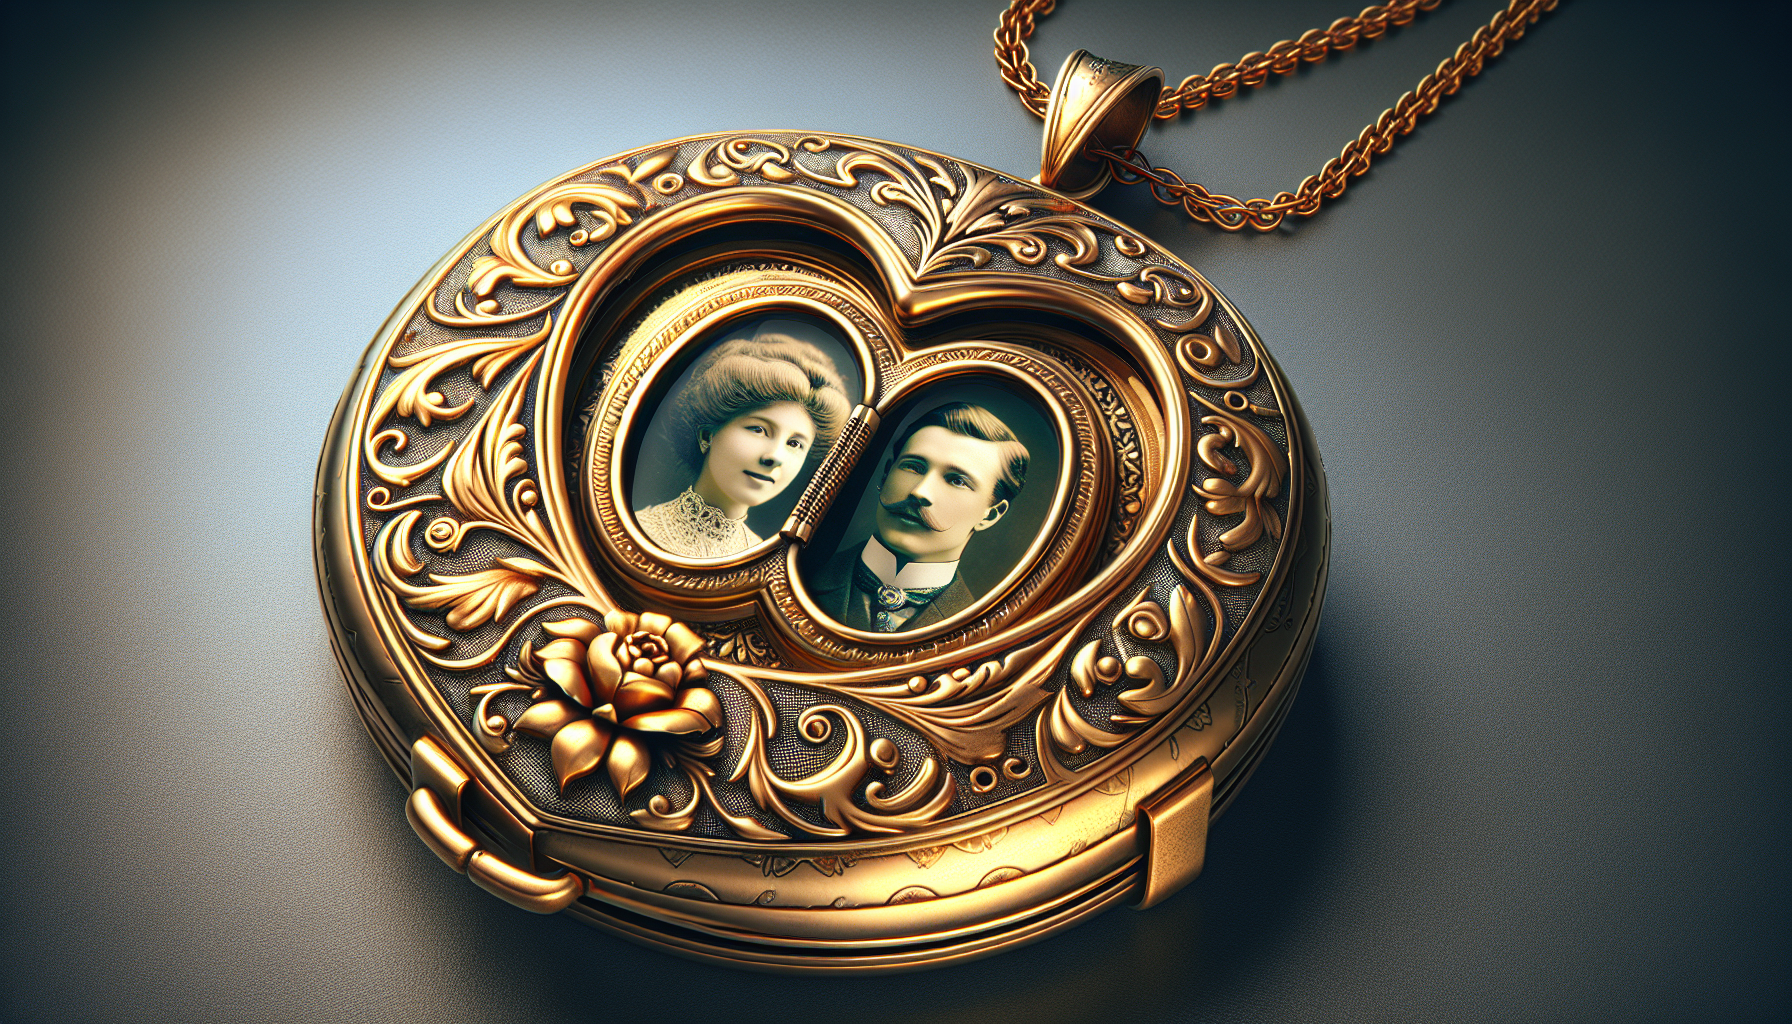 A depiction of an ornate gold locket necklace, styled in vintage fashion. The front of the locket displays intricate engravings, perhaps floral or other such delicate patterns. Inside the locket, ther